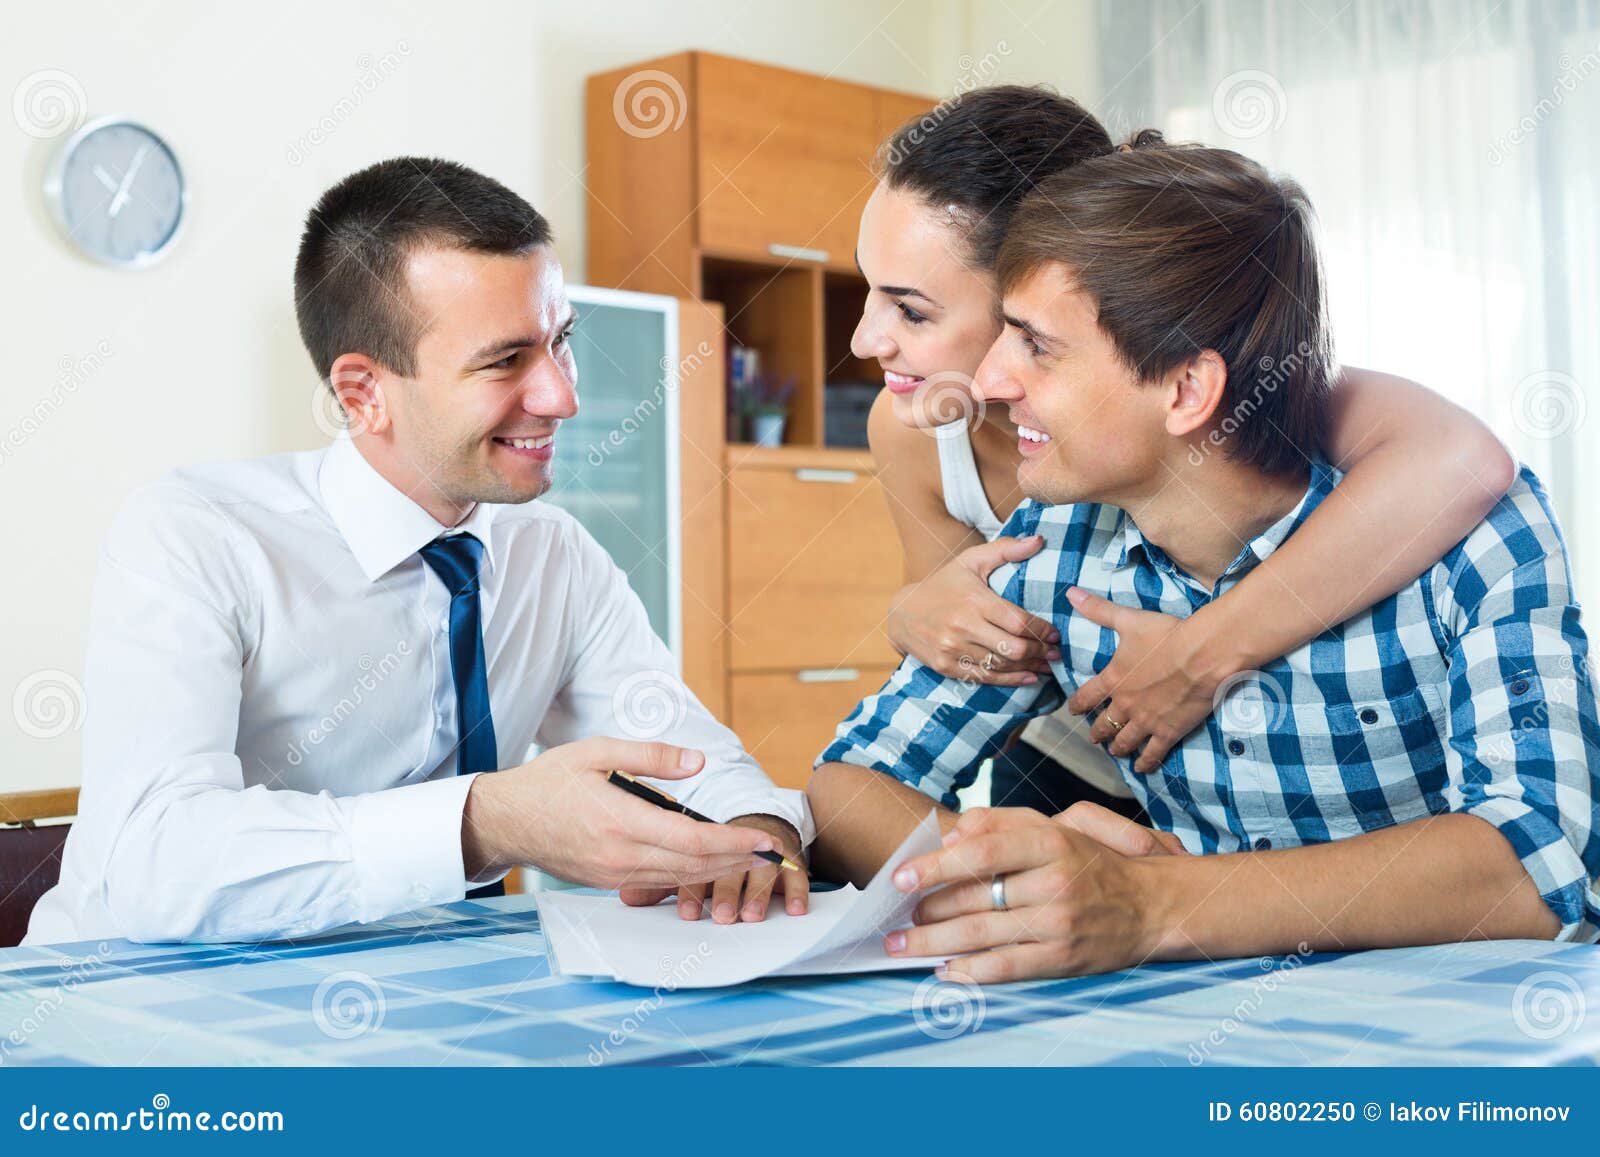 Insurance Agent And Couple Indoors Stock Photo - Image ...